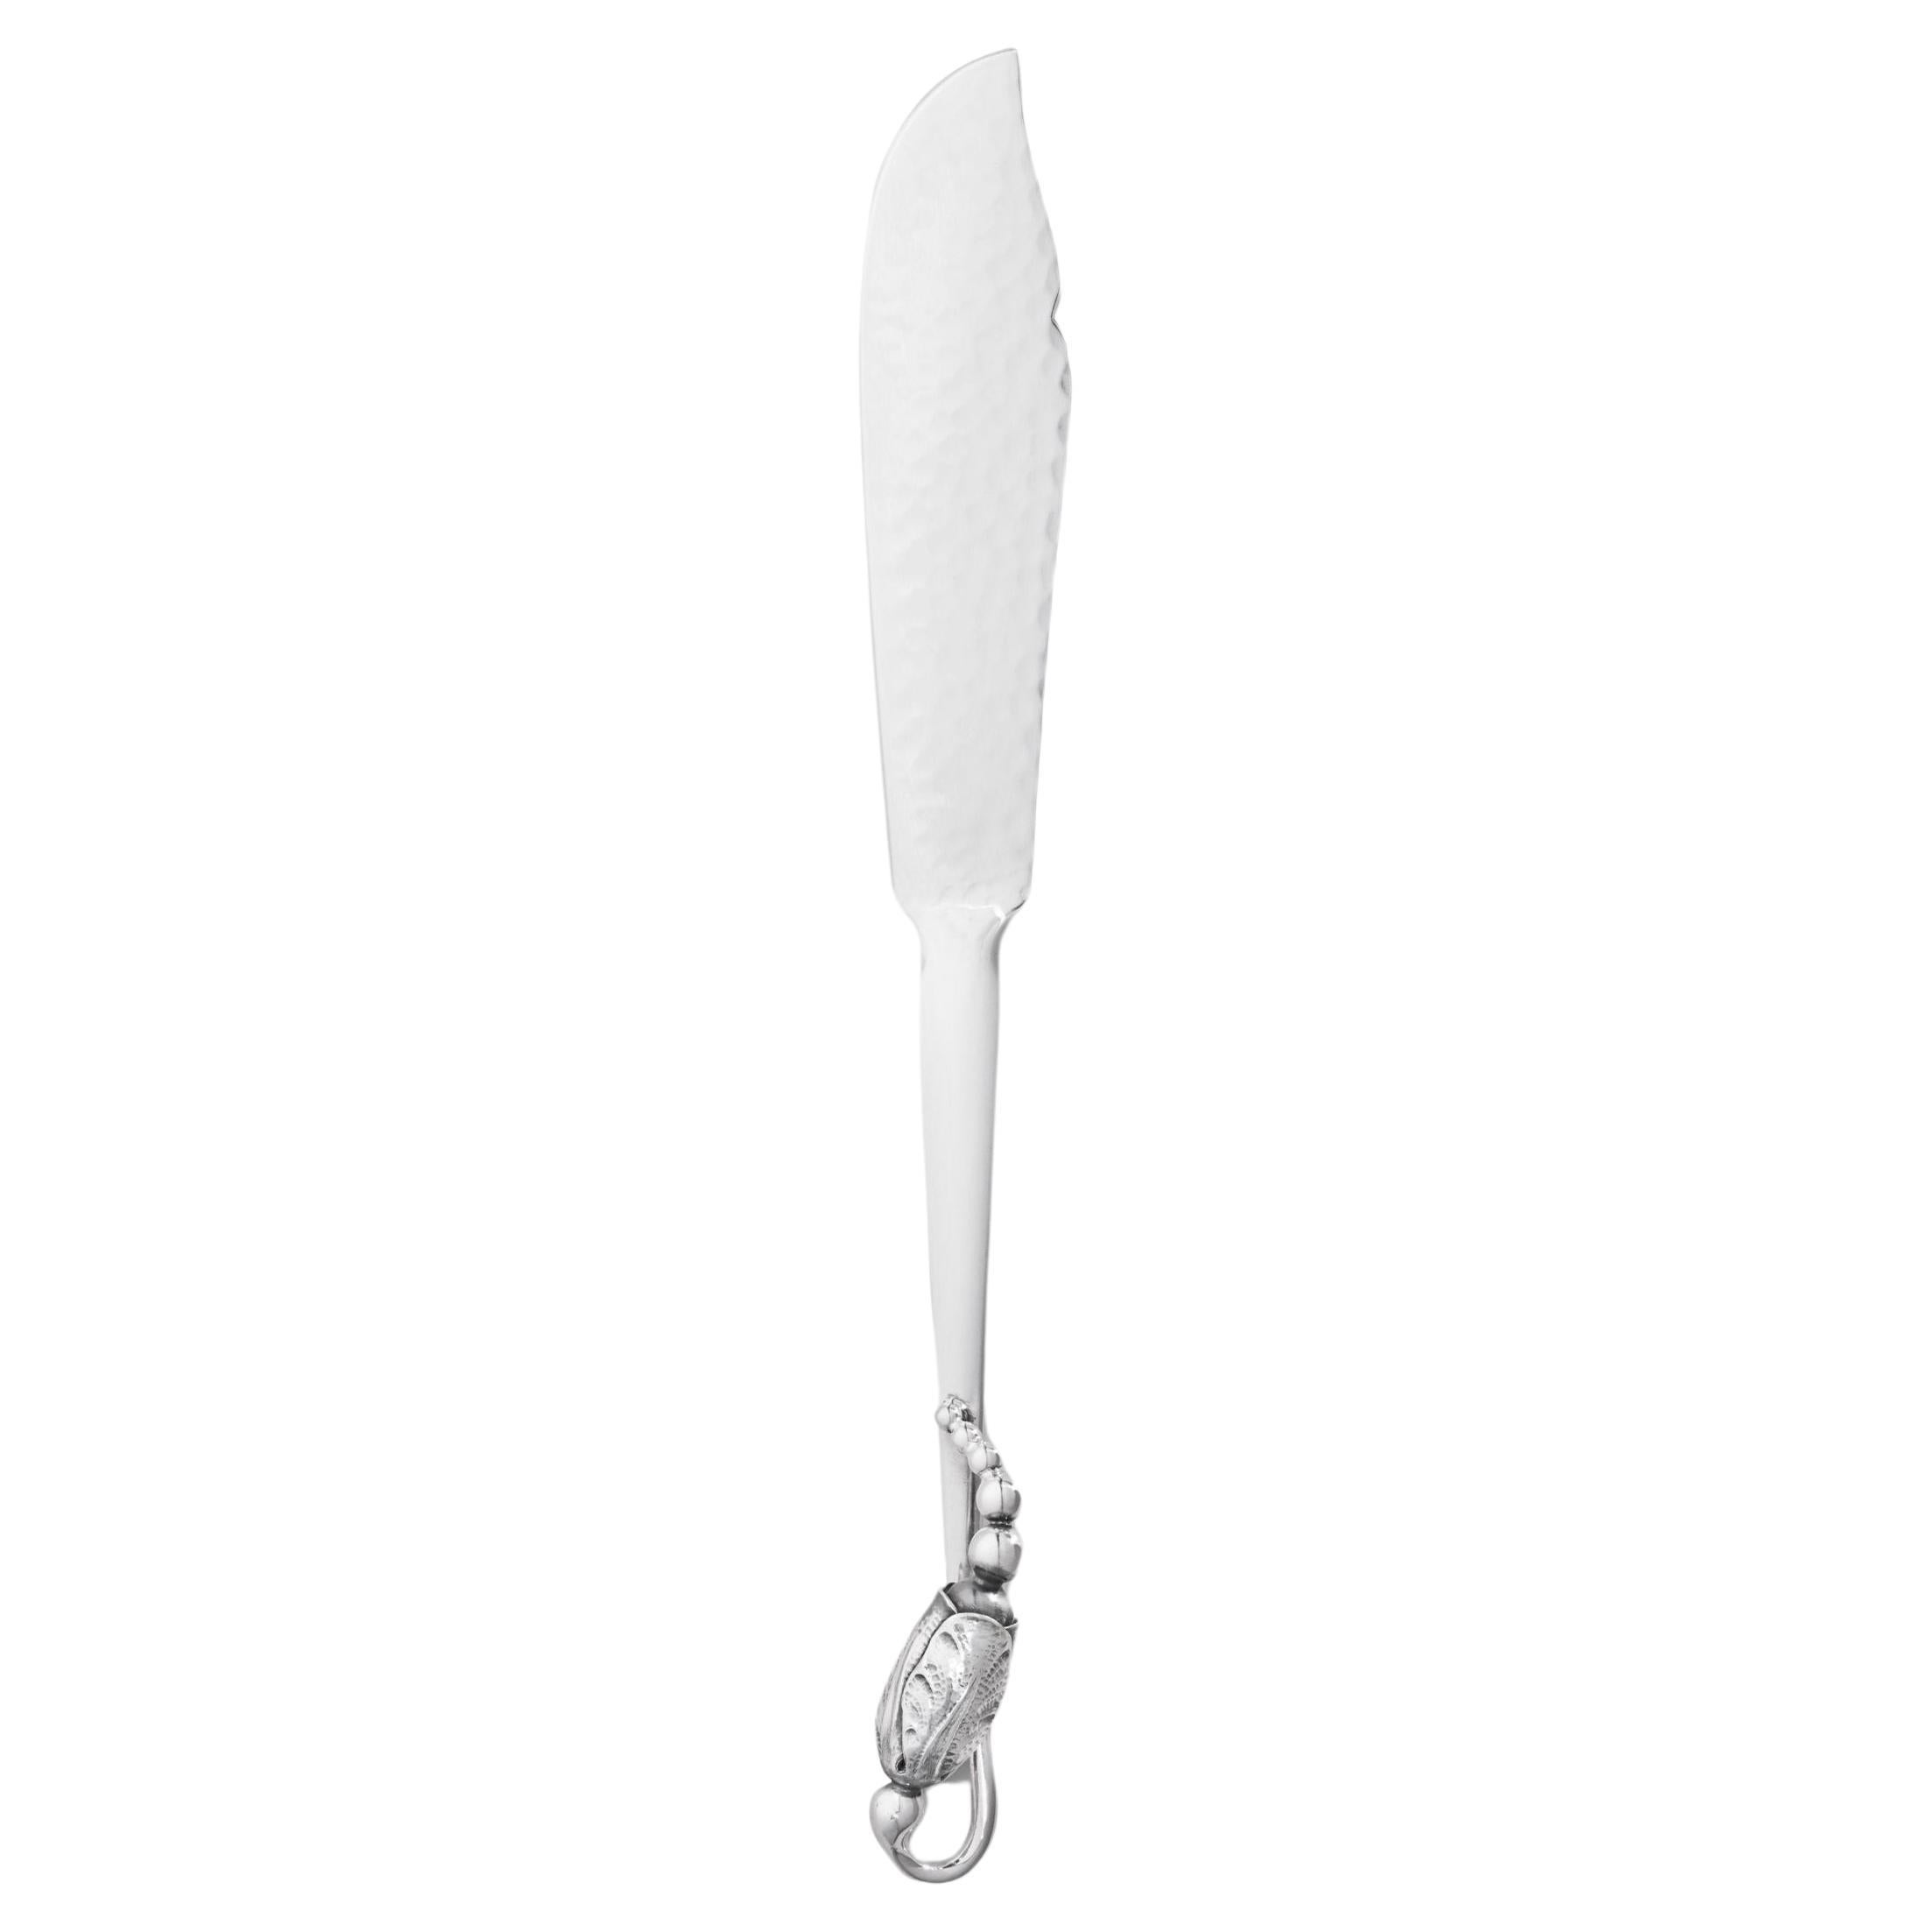 New Georg Jensen Blossom Sterling Silver Fish Knife 062 For Sale